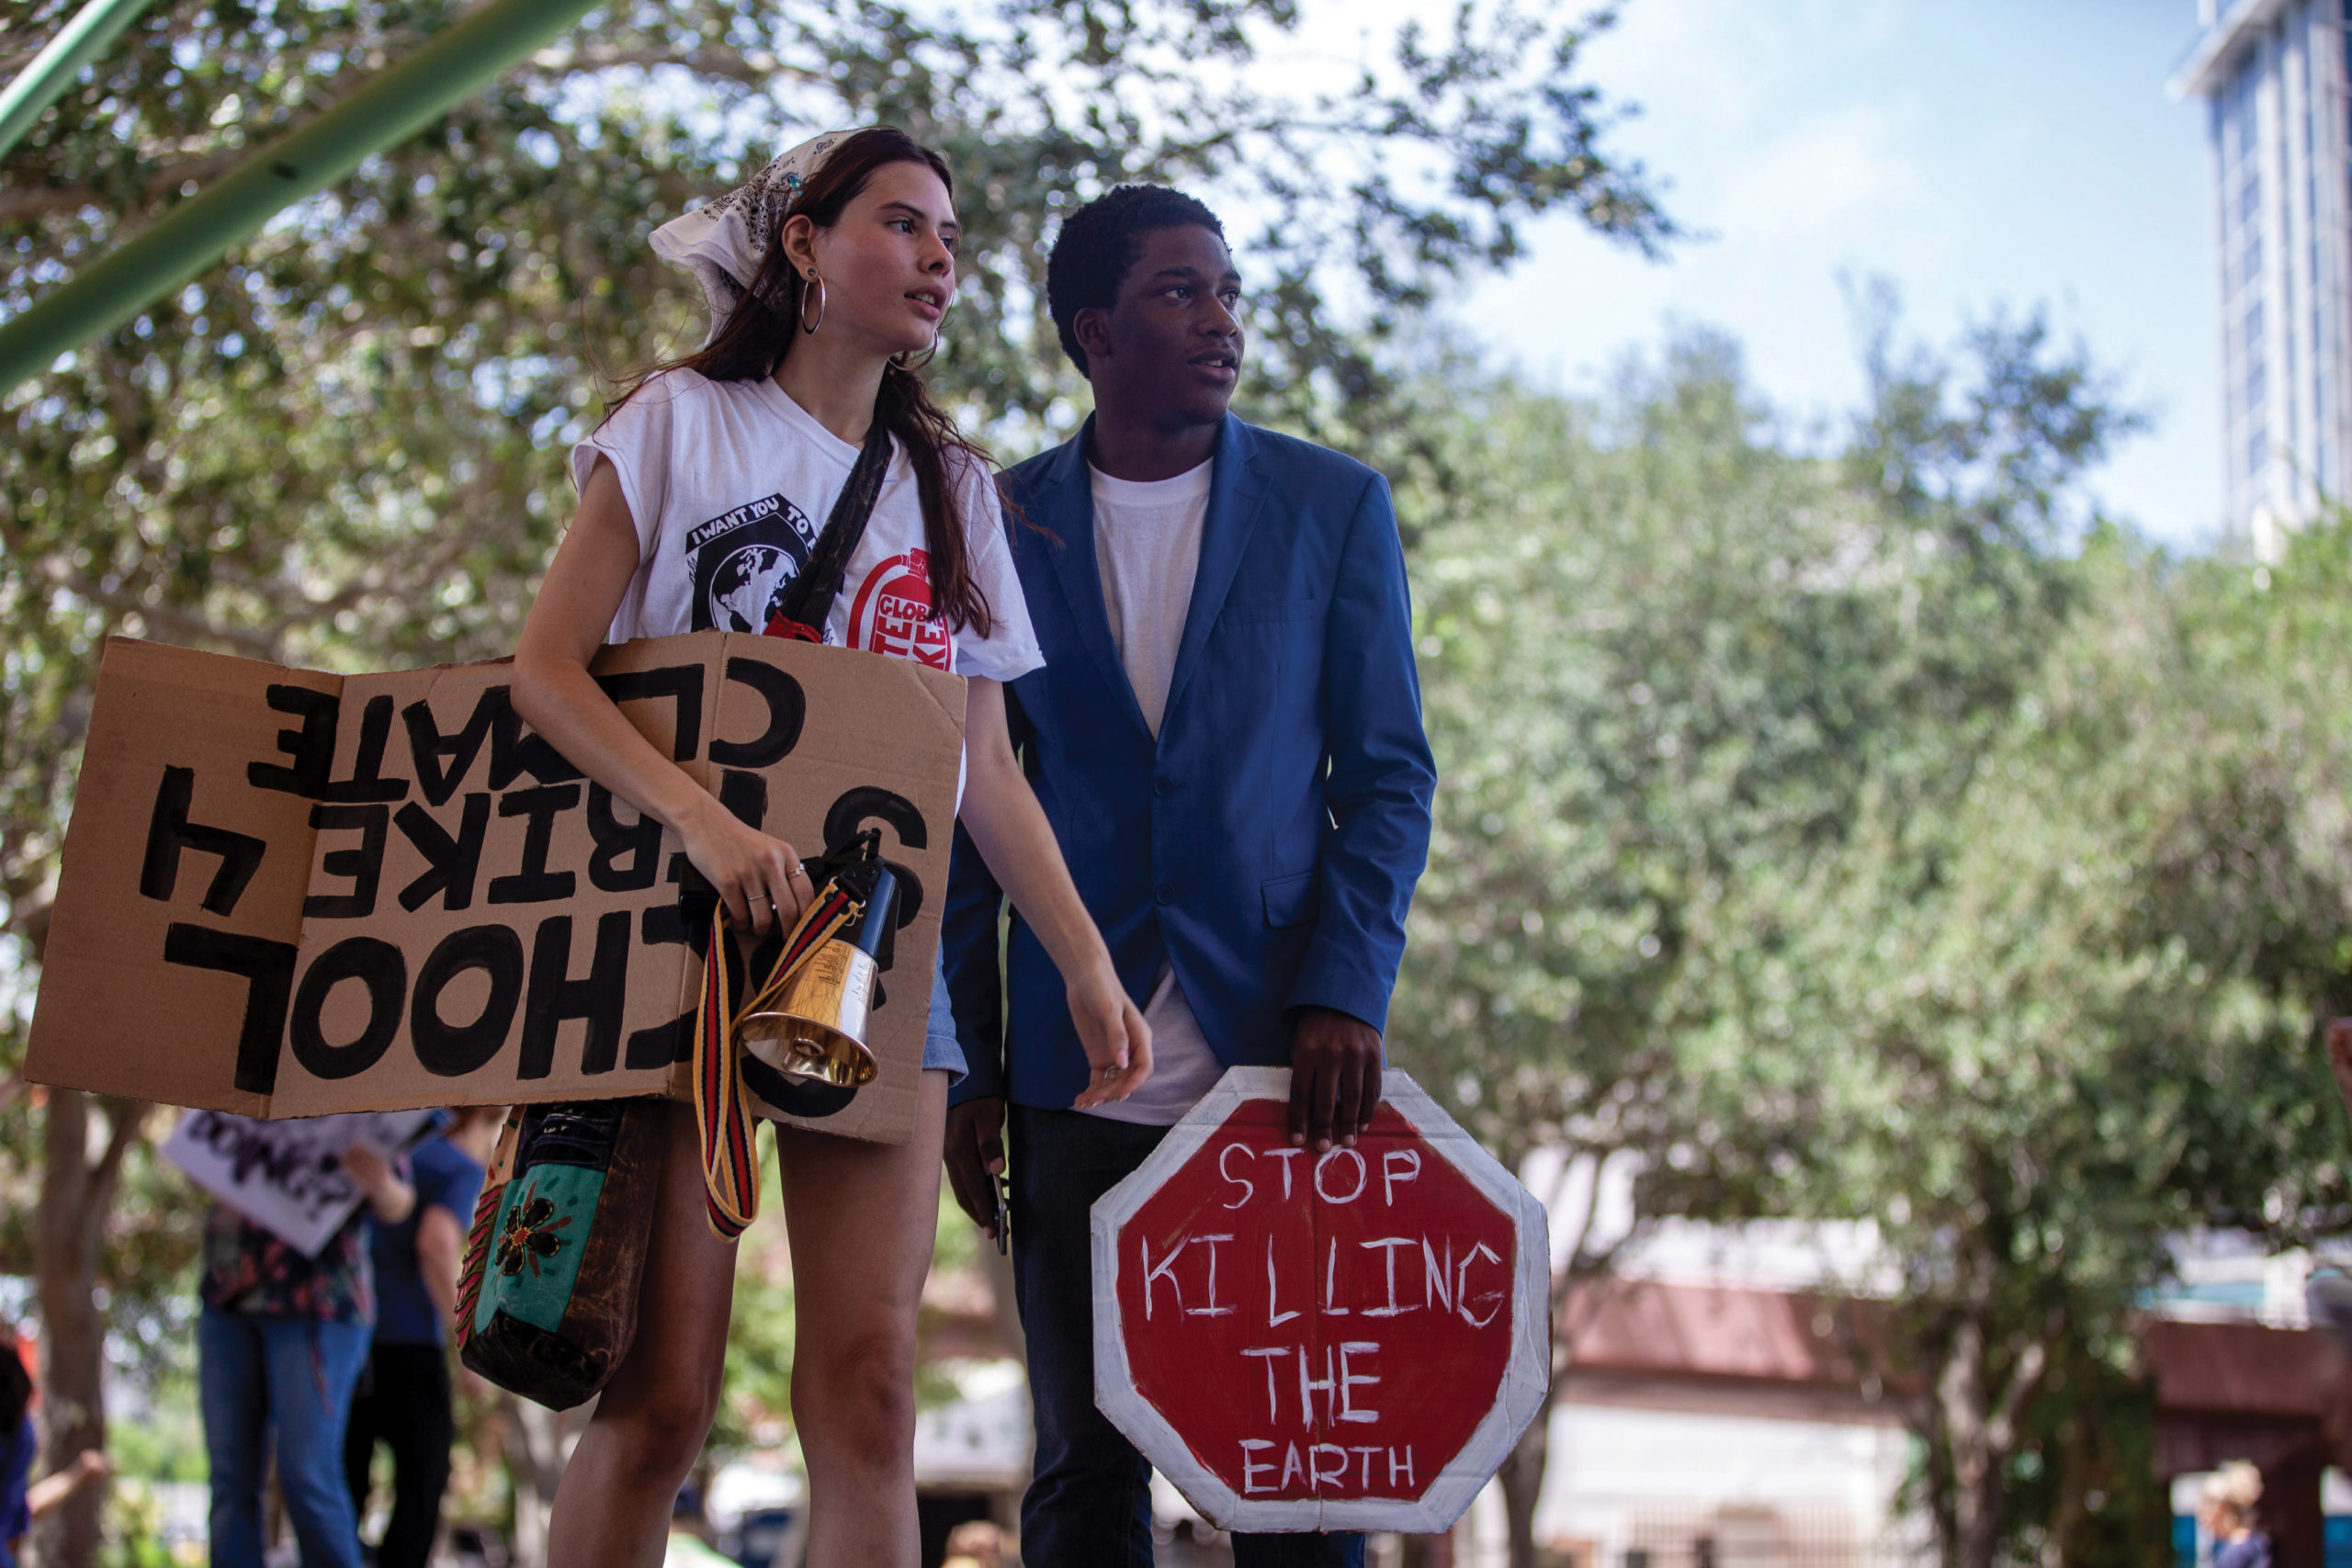 Searching for Change. Cypress Bay High School student activist Martina Velásquez and Broward County Human Relations Committee representative Elijah Manley oversee the Fort Lauderdale climate change protest, which they organized. Photo by Darian Williams